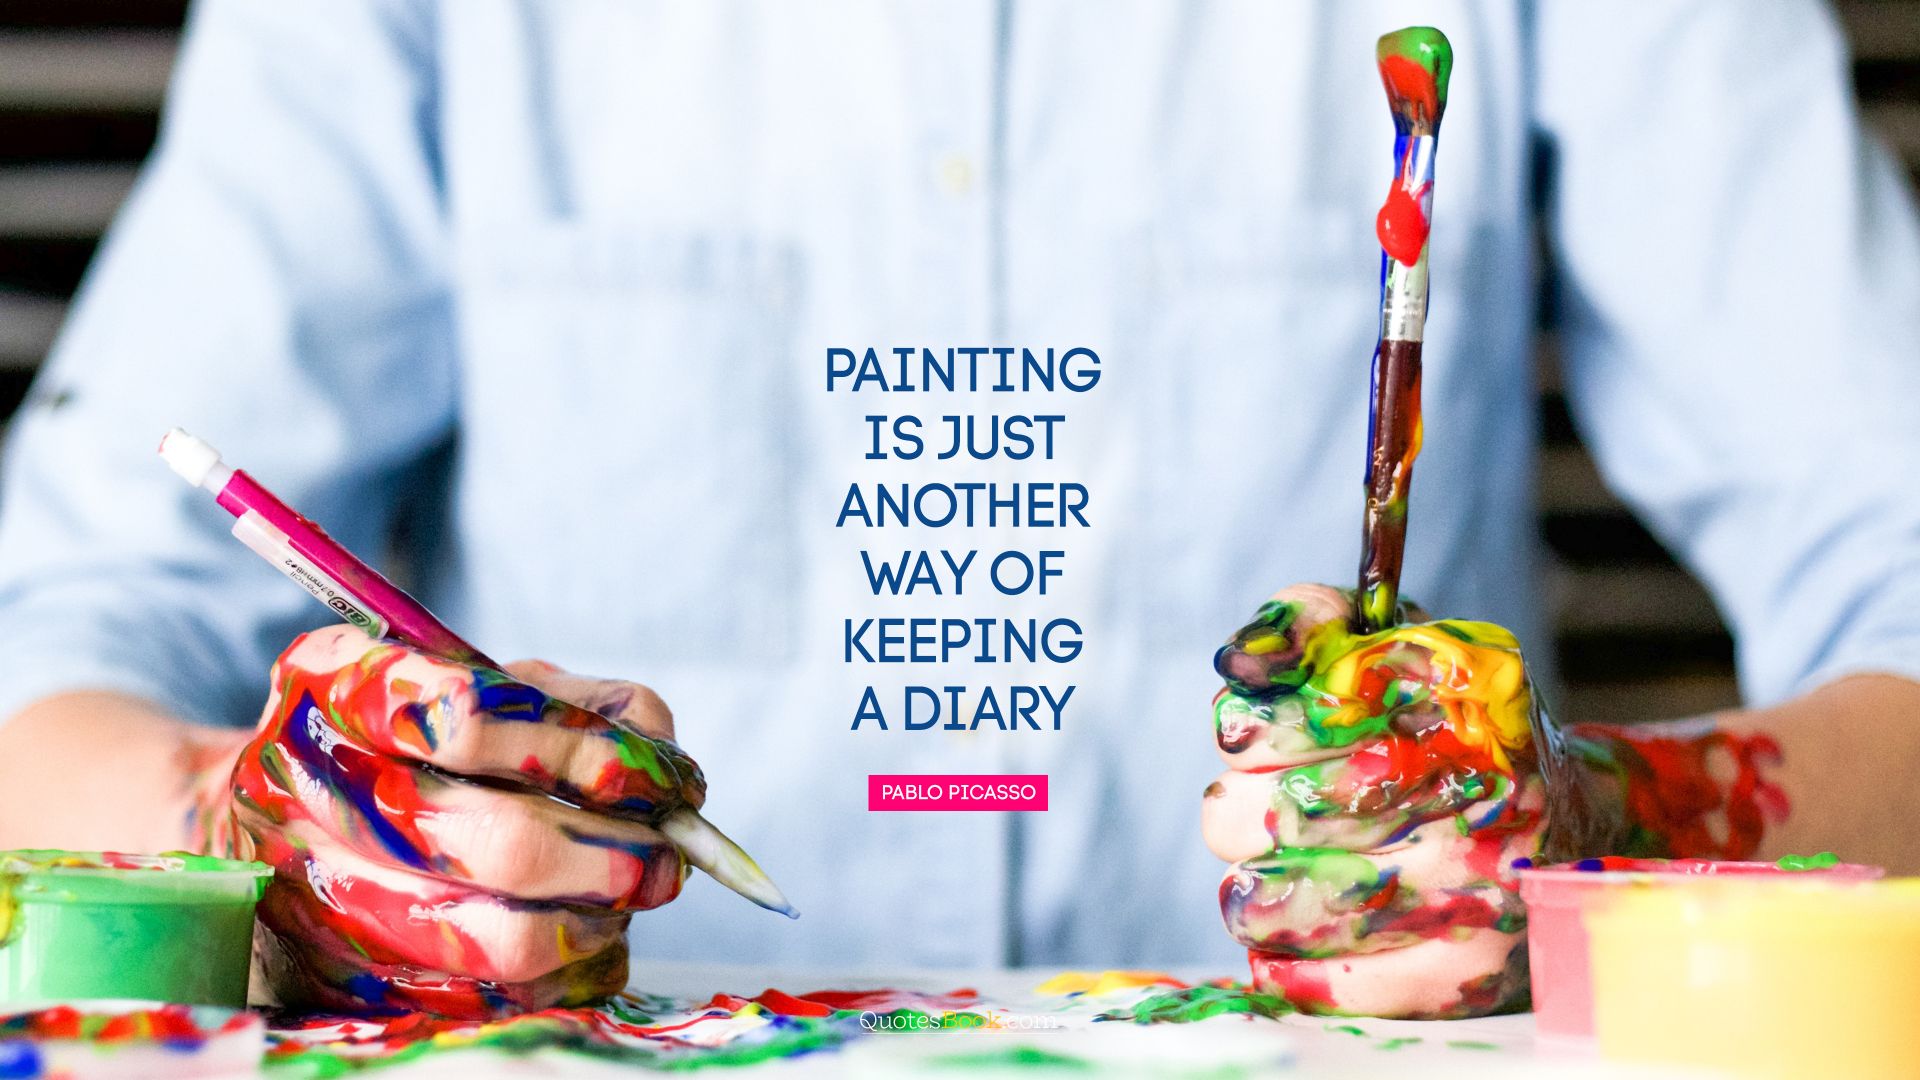 Painting is just another way of keeping a diary. - Quote by Pablo Picasso